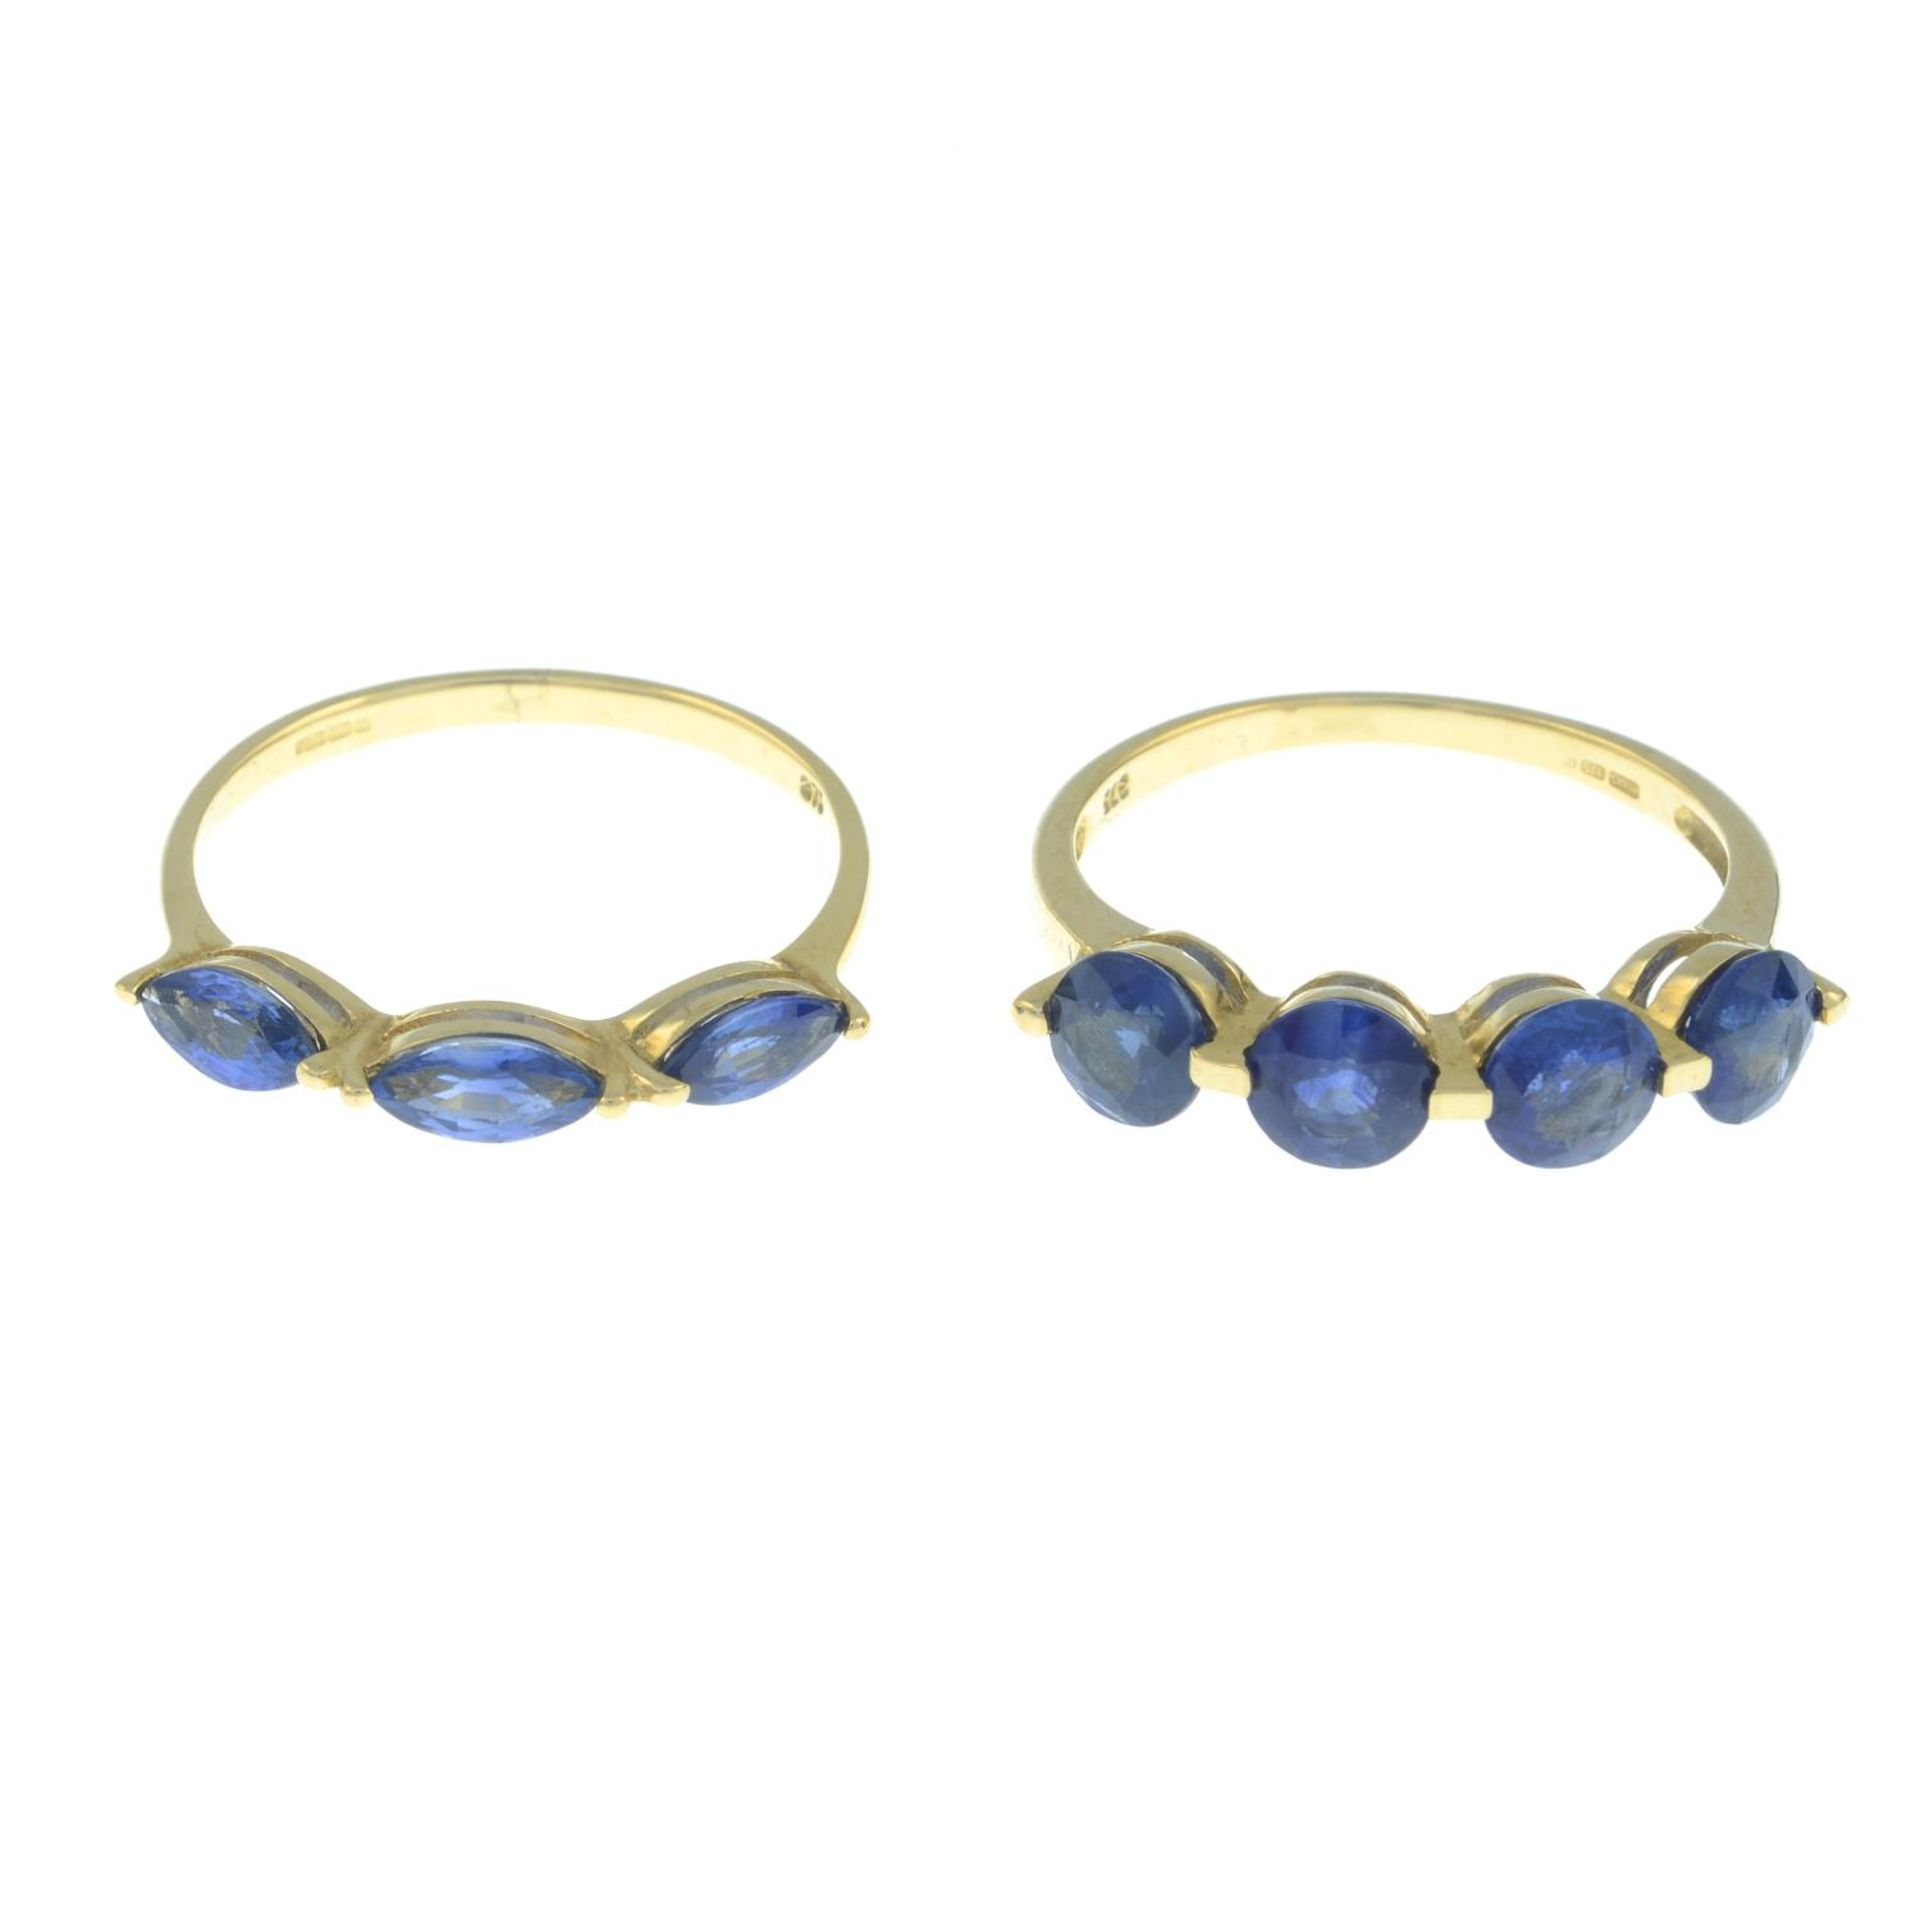 Two 9ct gold sapphire rings.Hallmarks for 9ct gold.